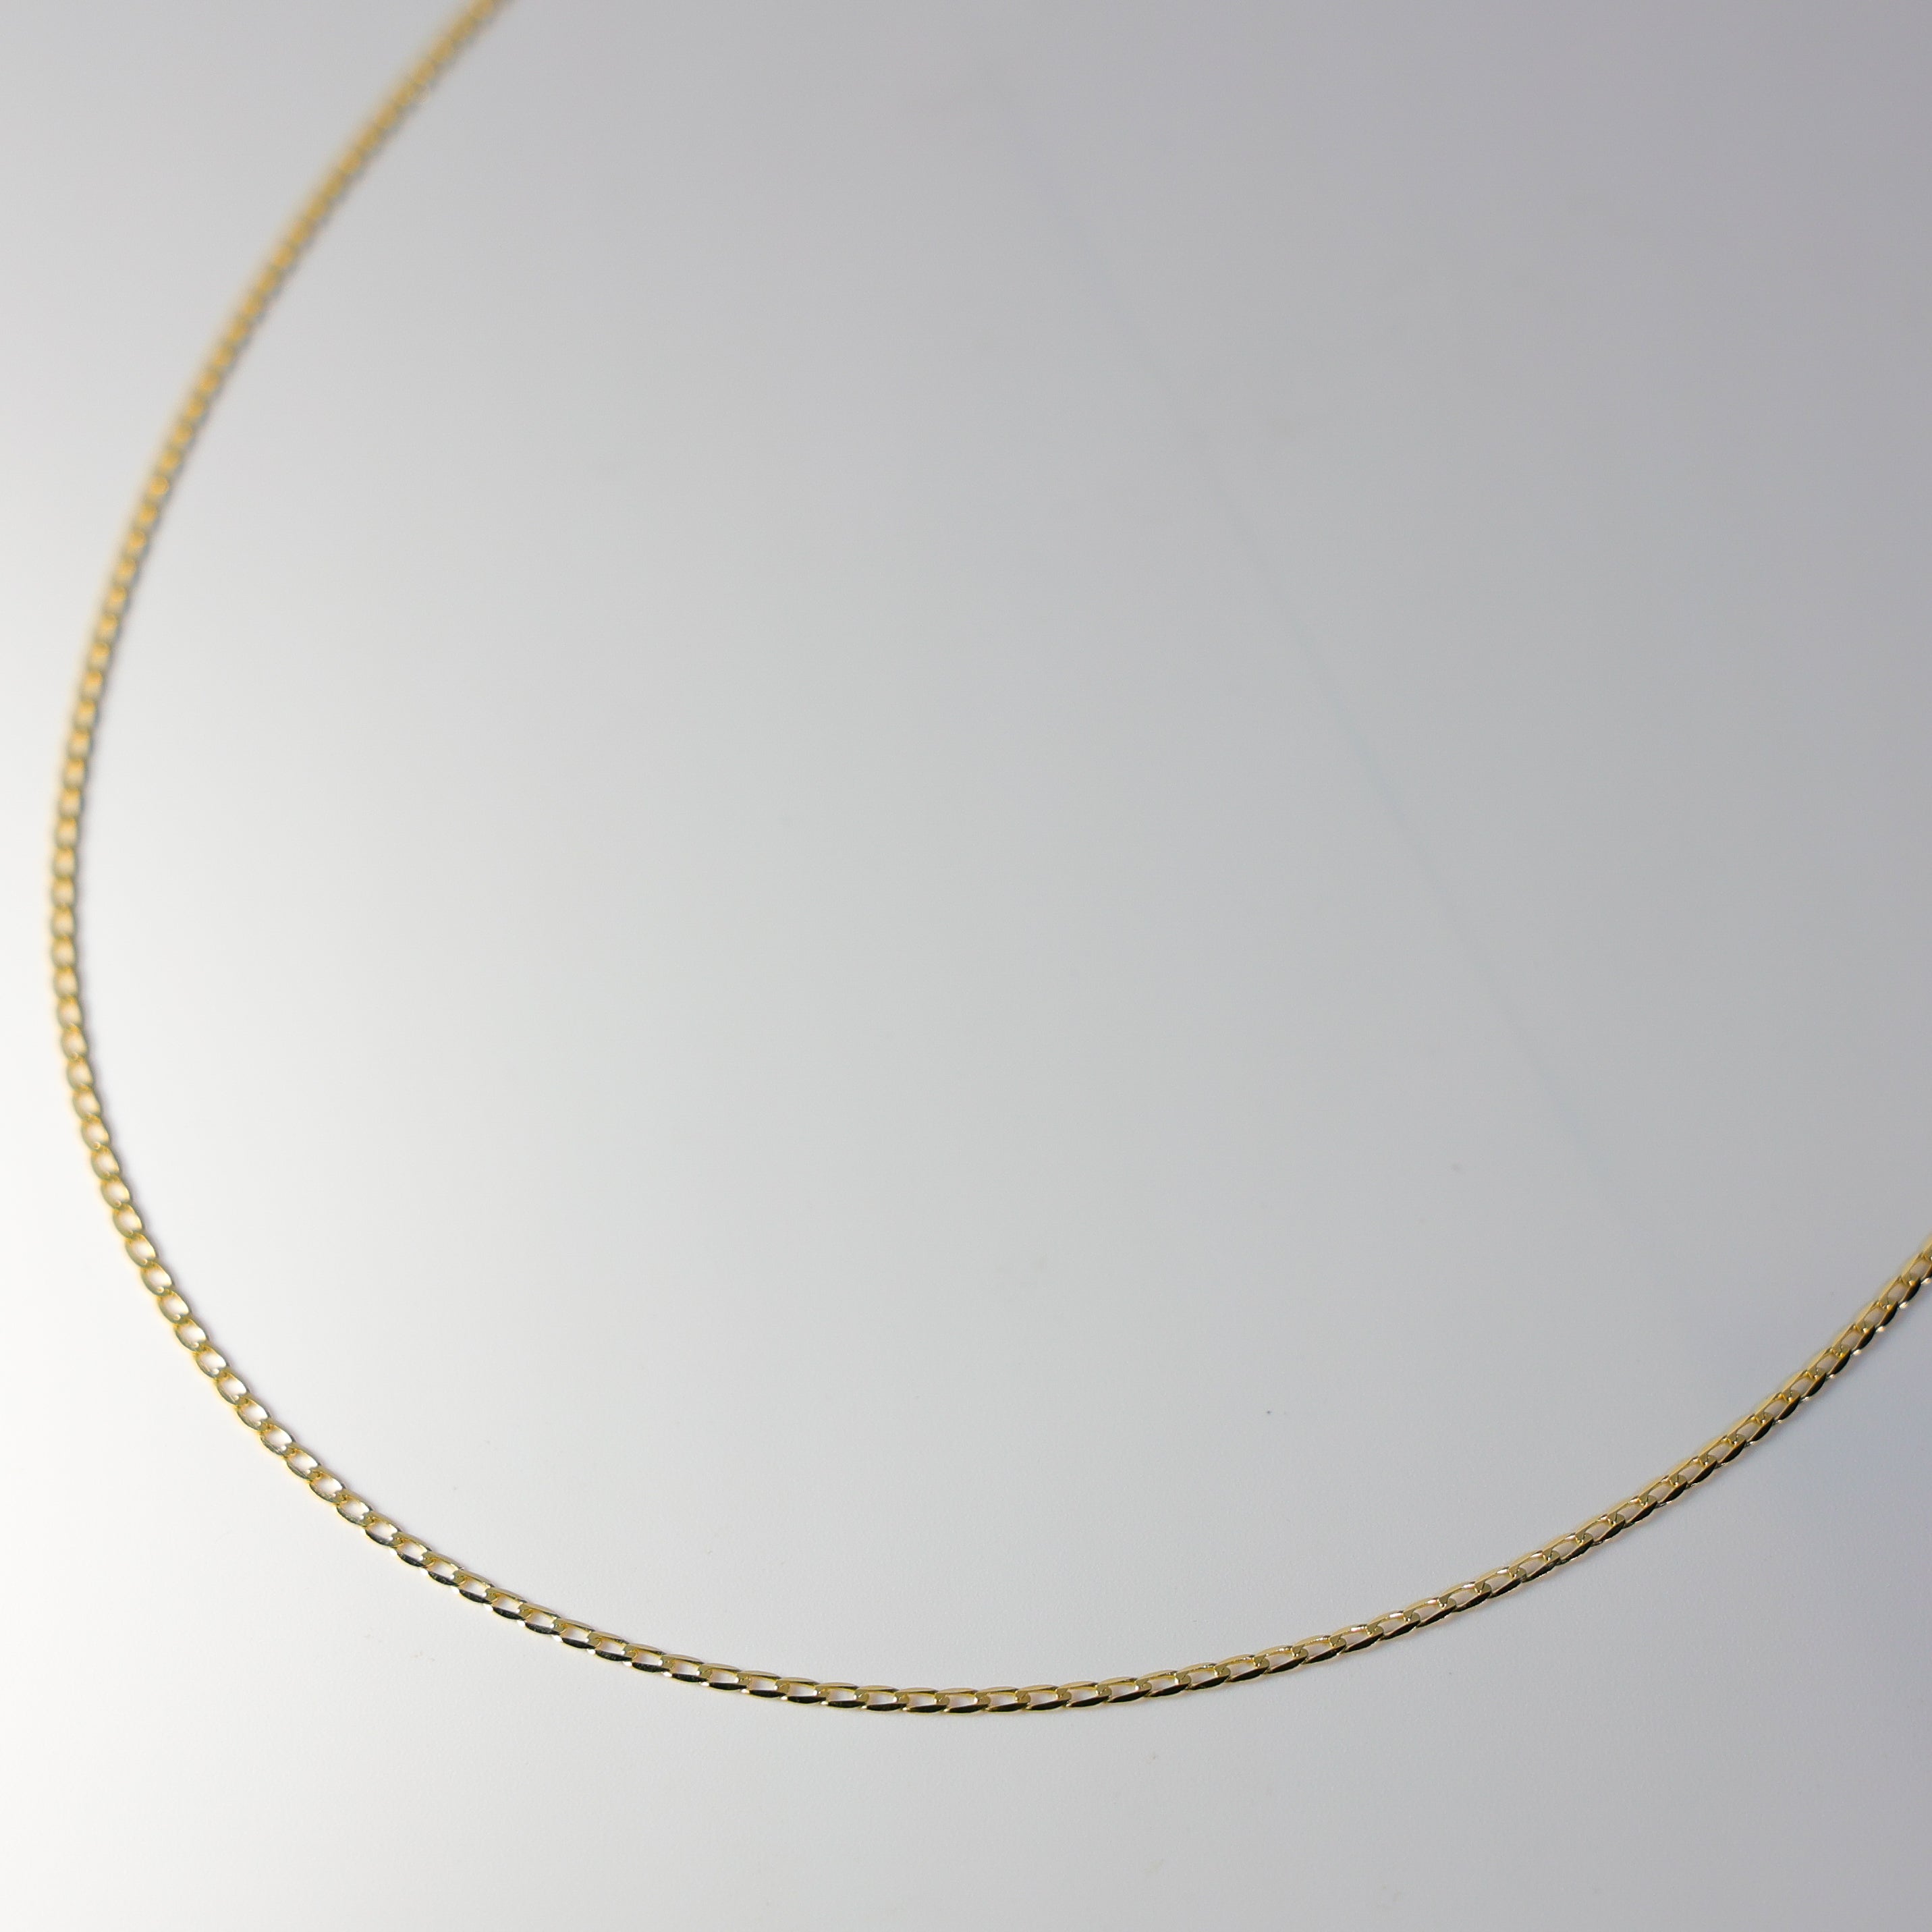 2mm Solid 14K Gold Figaro Link Chain Model-0490 - Charlie & Co. Jewelry